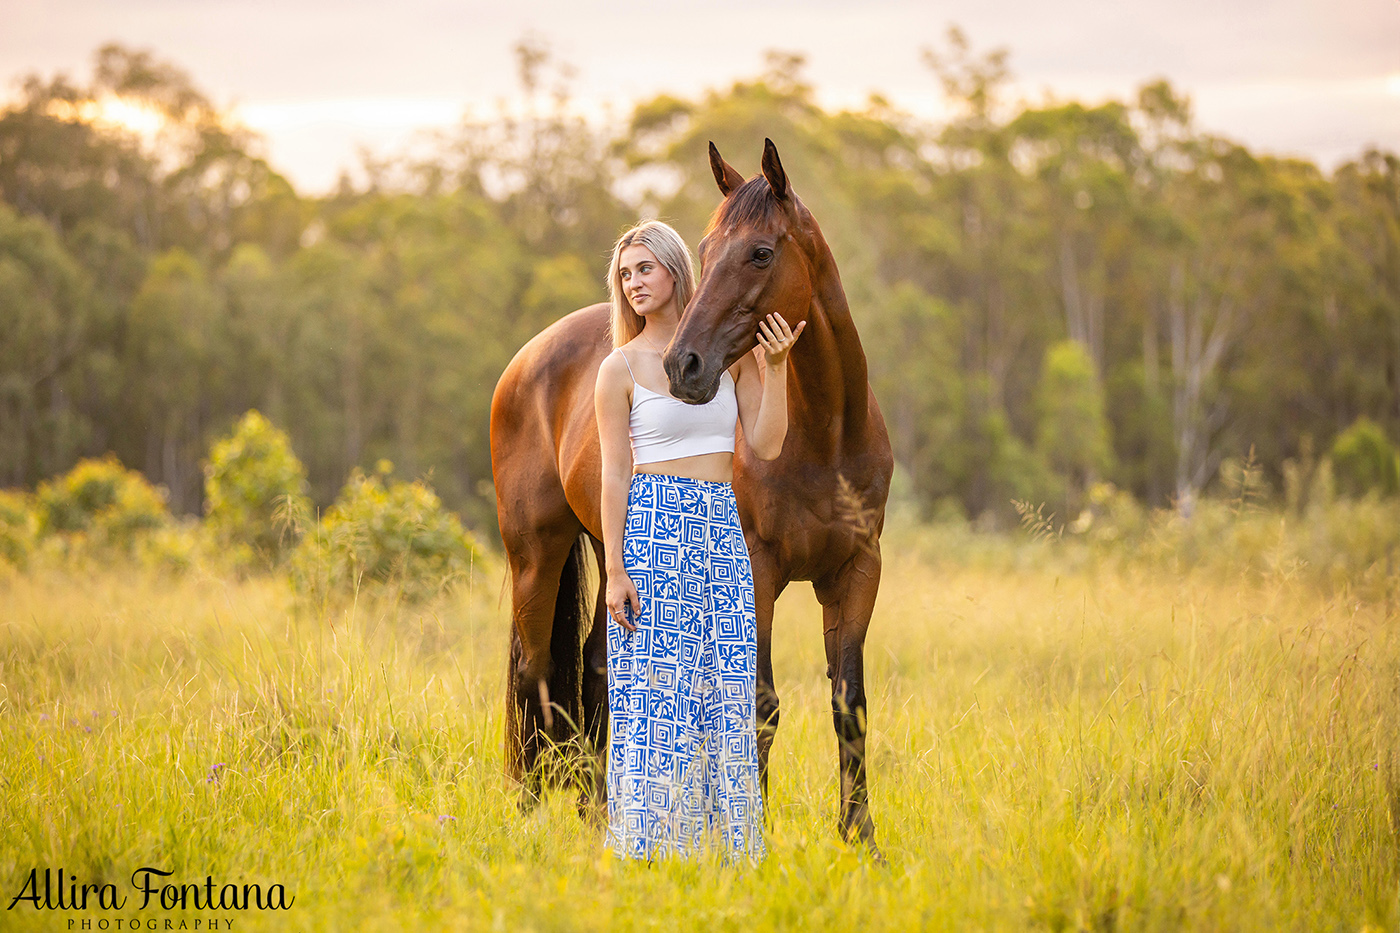 Trista and Petch's photo session at Scheyville National Park